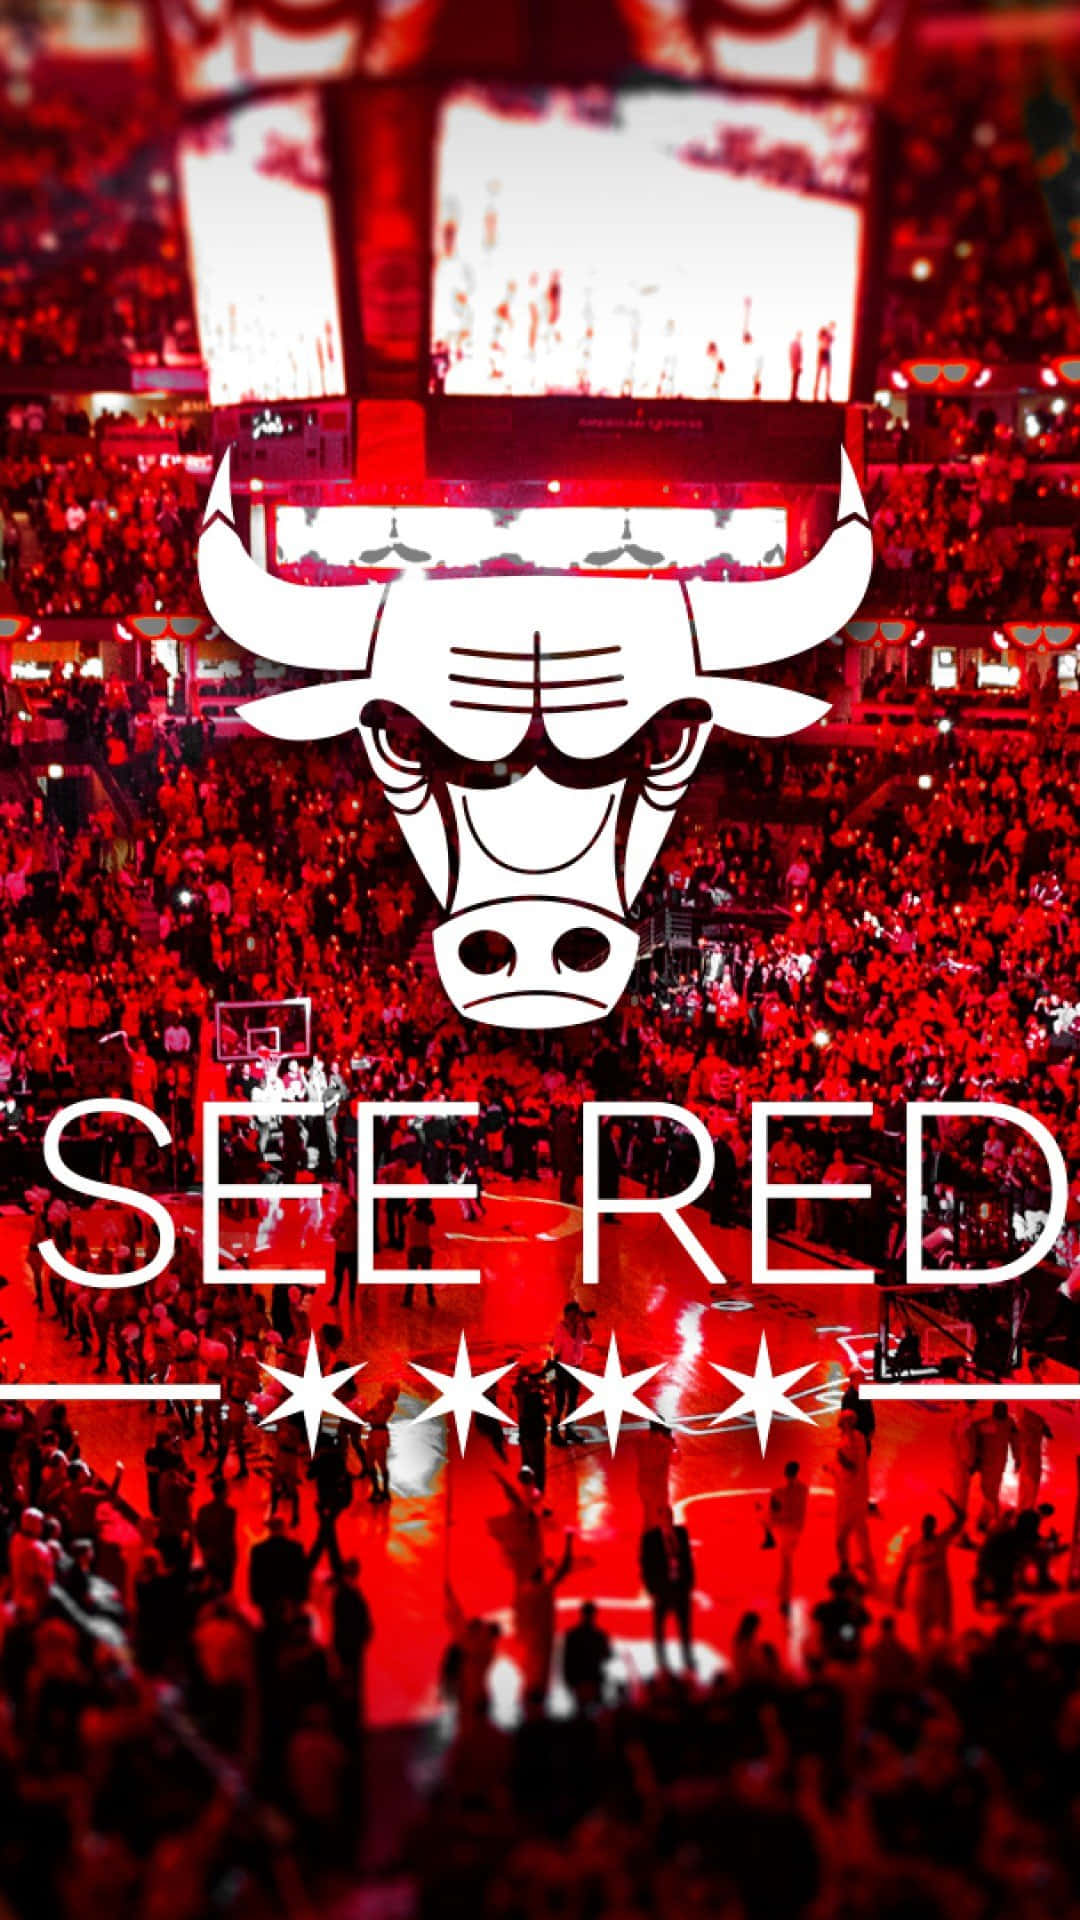 Free Chicago Bulls Wallpaper Downloads, [200+] Chicago Bulls Wallpapers for  FREE 